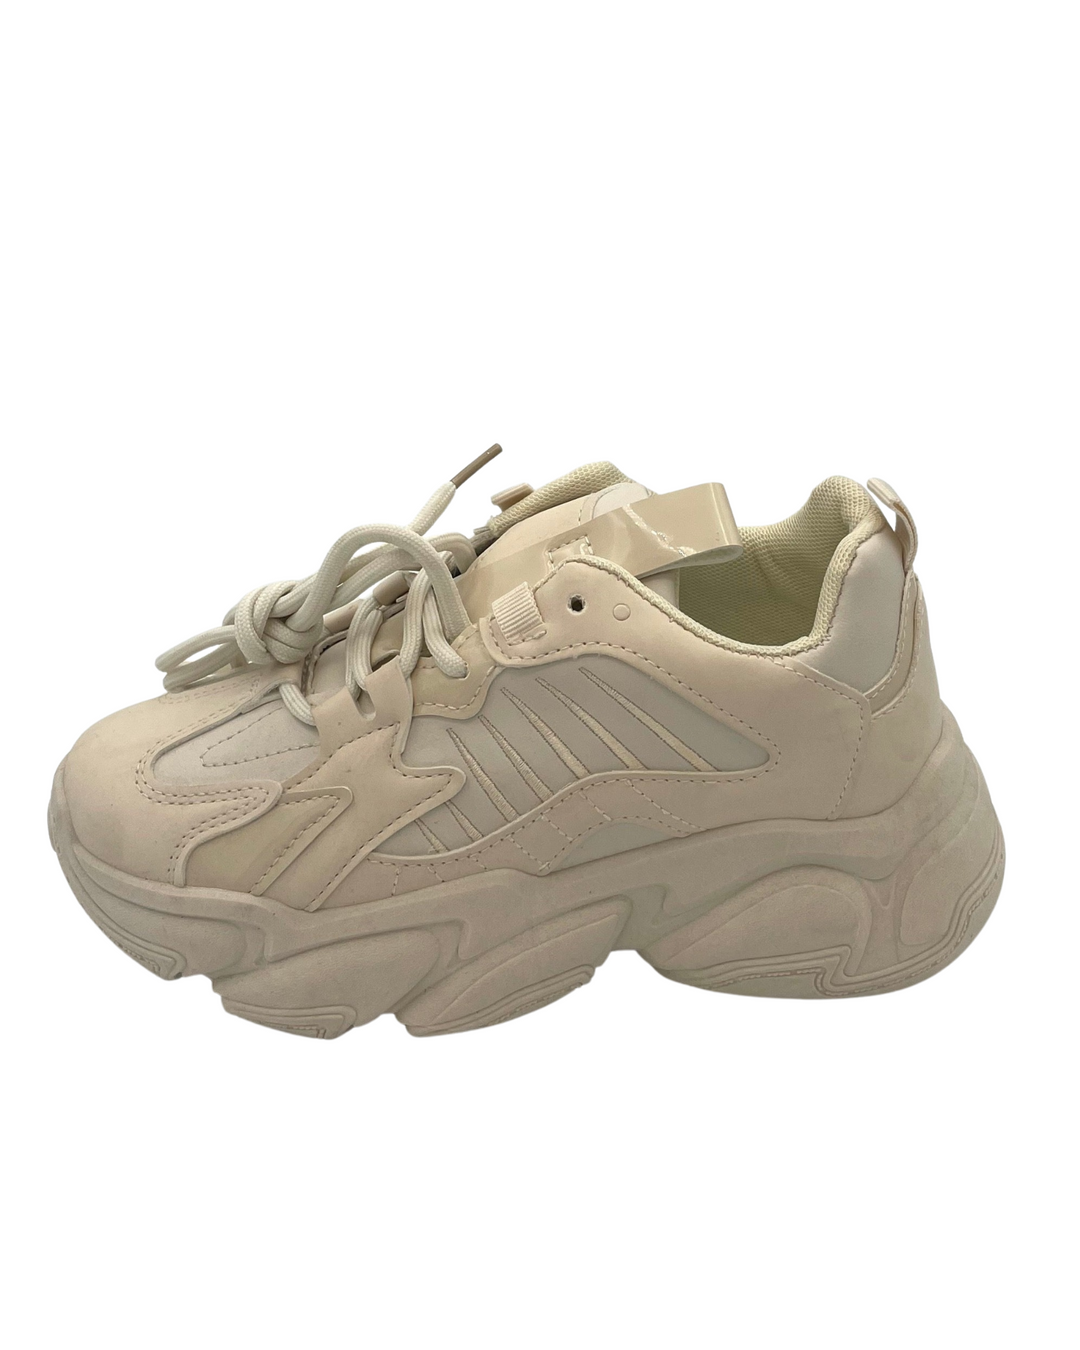 Beige Chunky Sneakers - Size 5